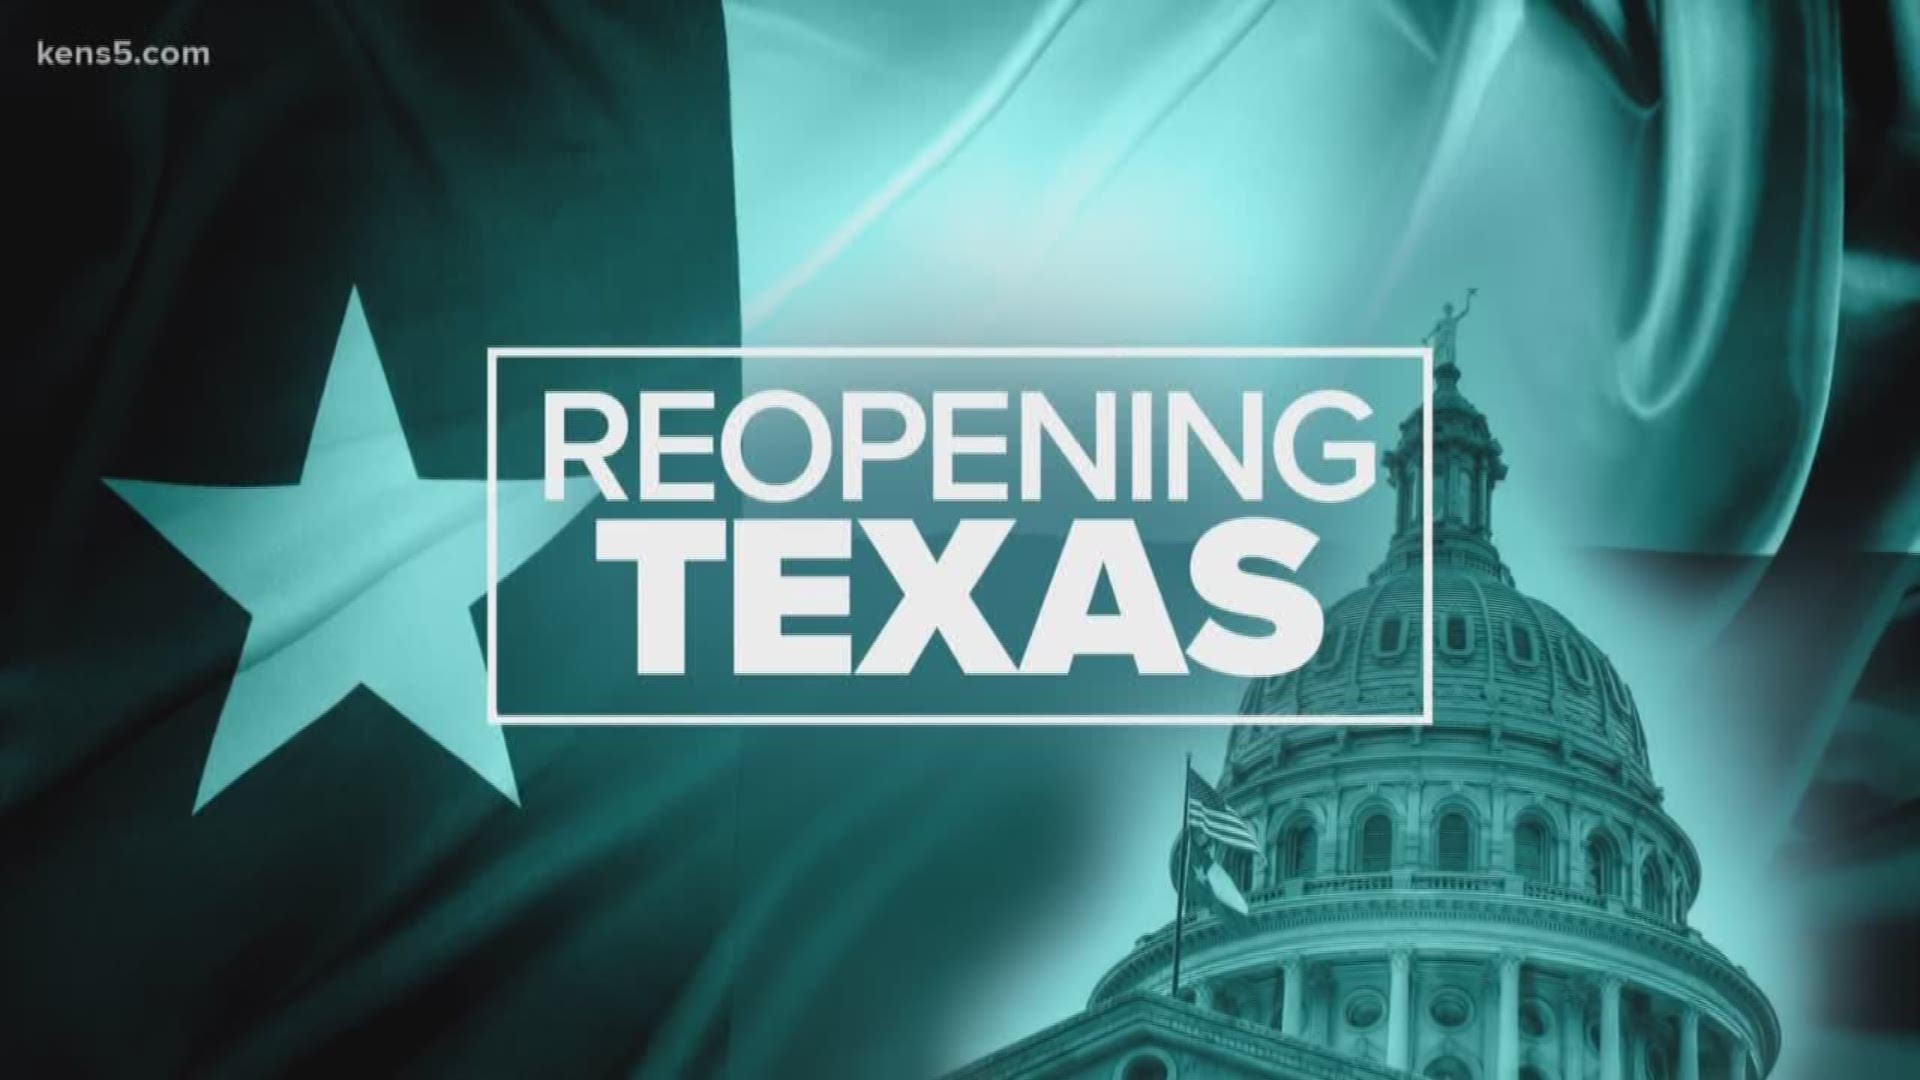 Gov. Abbott is expected to announce the next part of the state's plan to reopen Texas today. Here's what the next phase could mean...